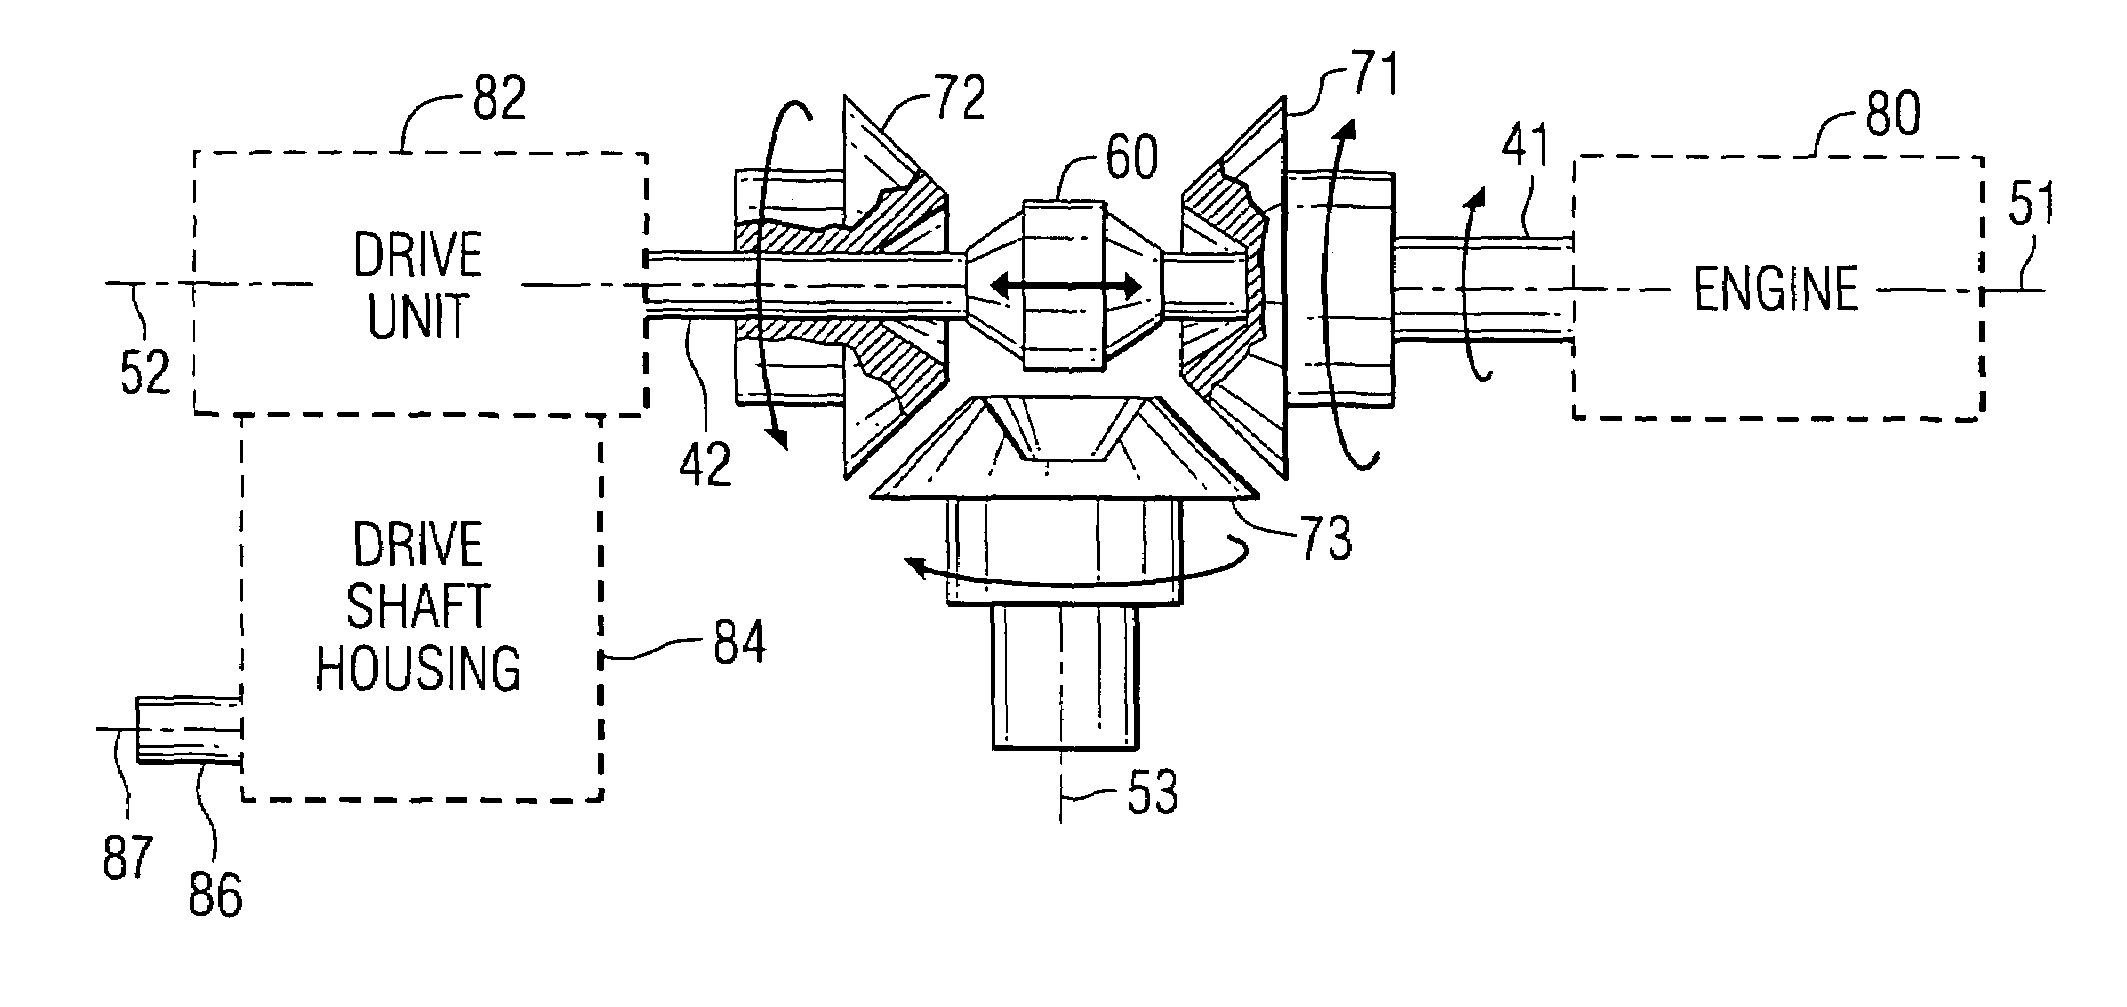 Marine transmission with a cone clutch used for direct transfer of torque